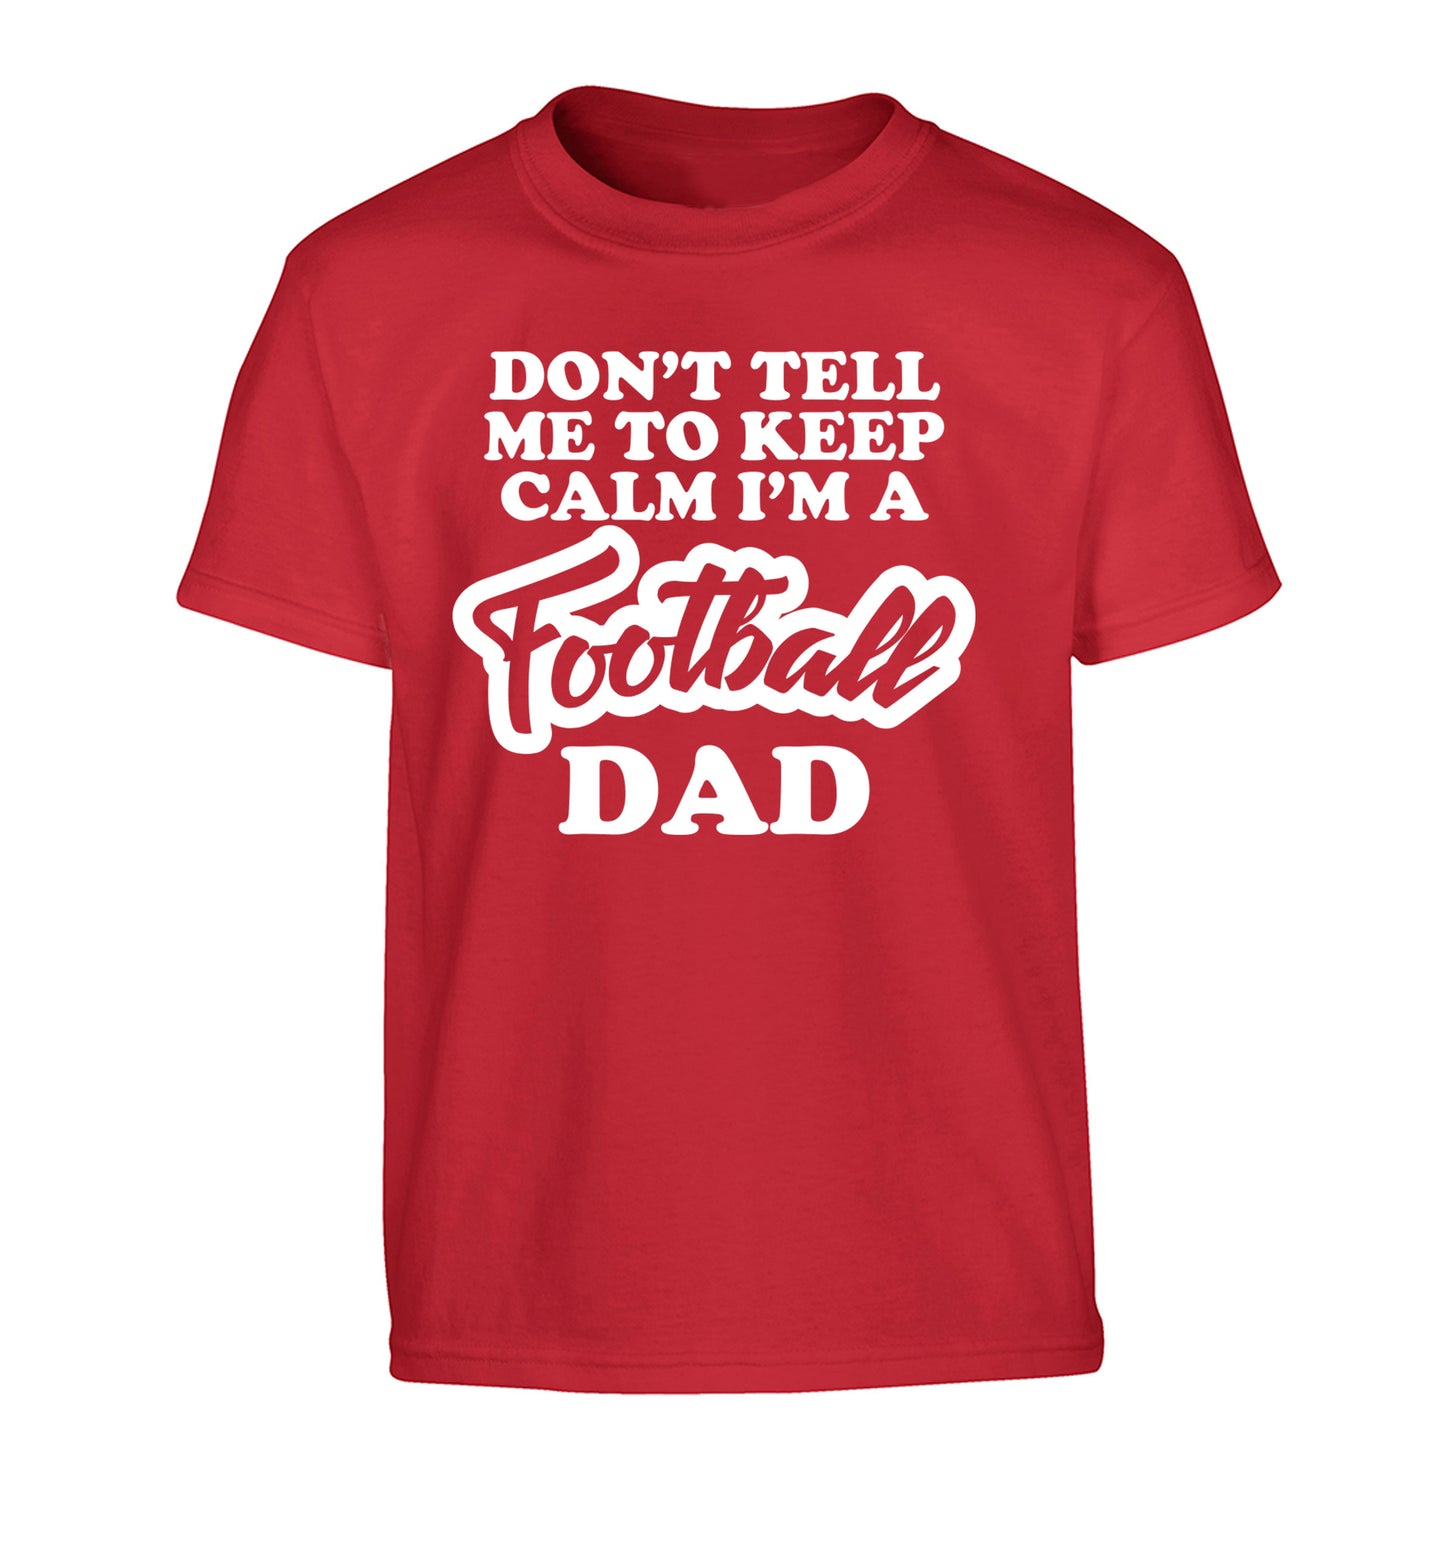 Don't tell me to keep calm I'm a football grandad Children's red Tshirt 12-14 Years